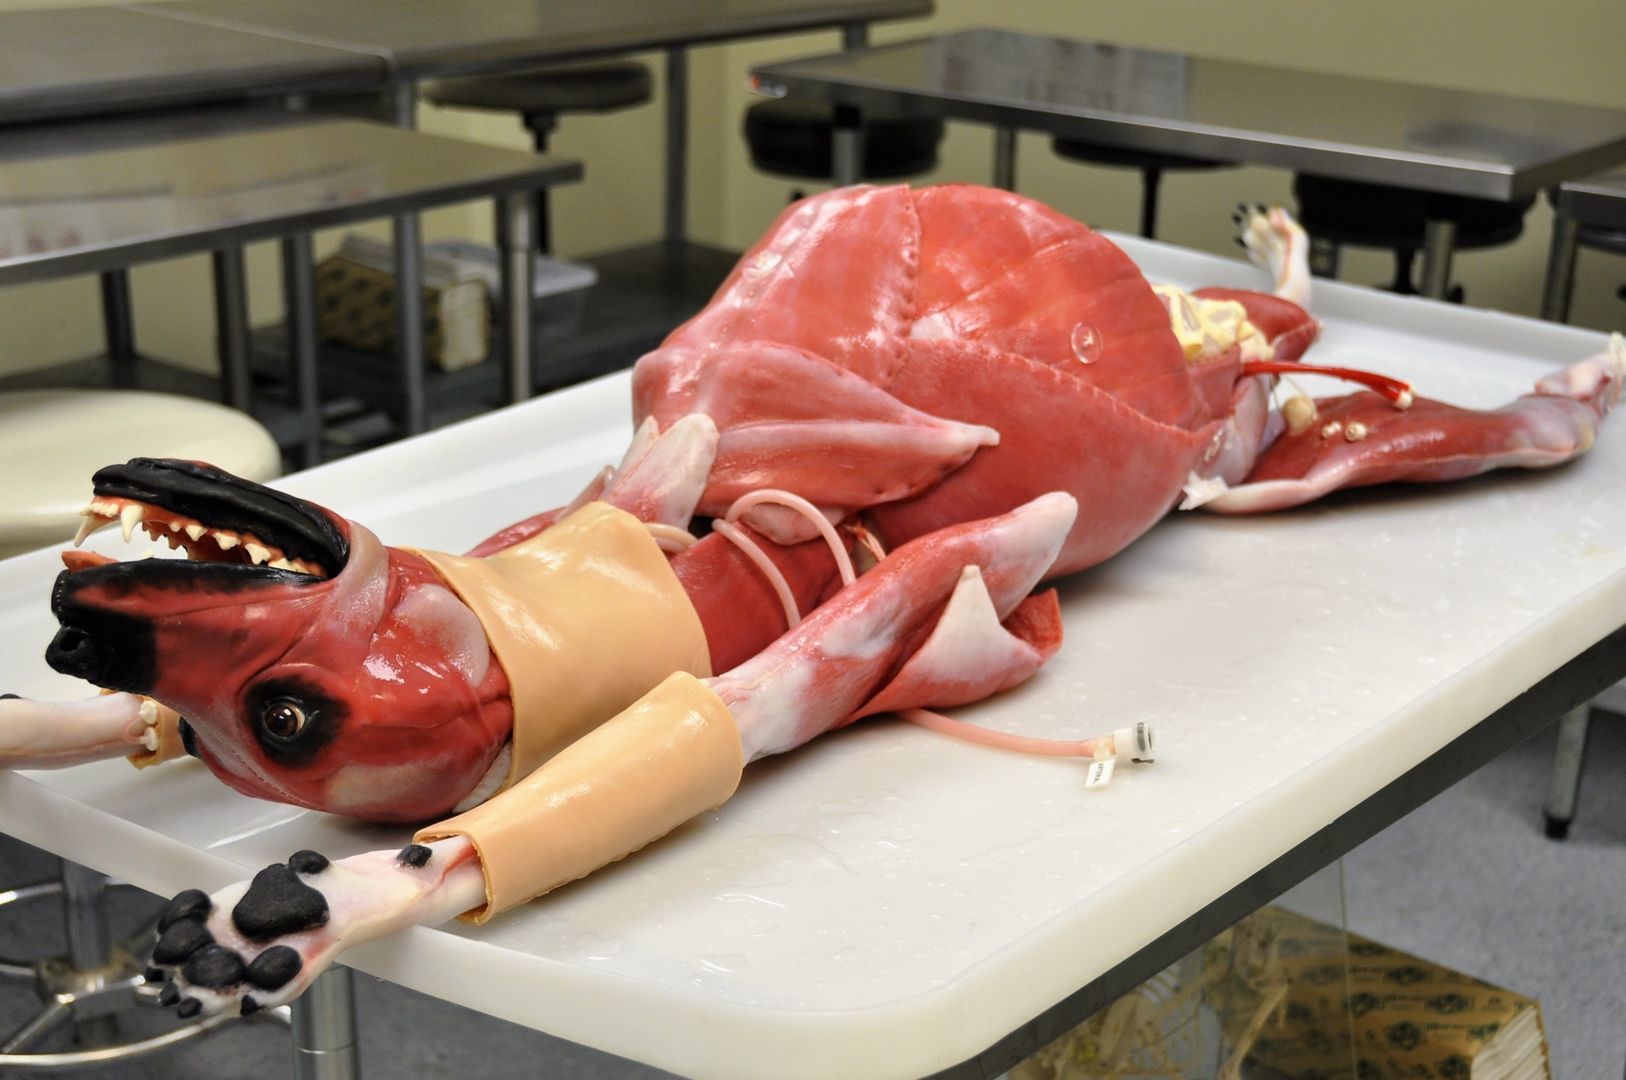 This synthetic canine cadaver, lying on an examination table, weighs 45 pounds and is made of water, fibers and salts.